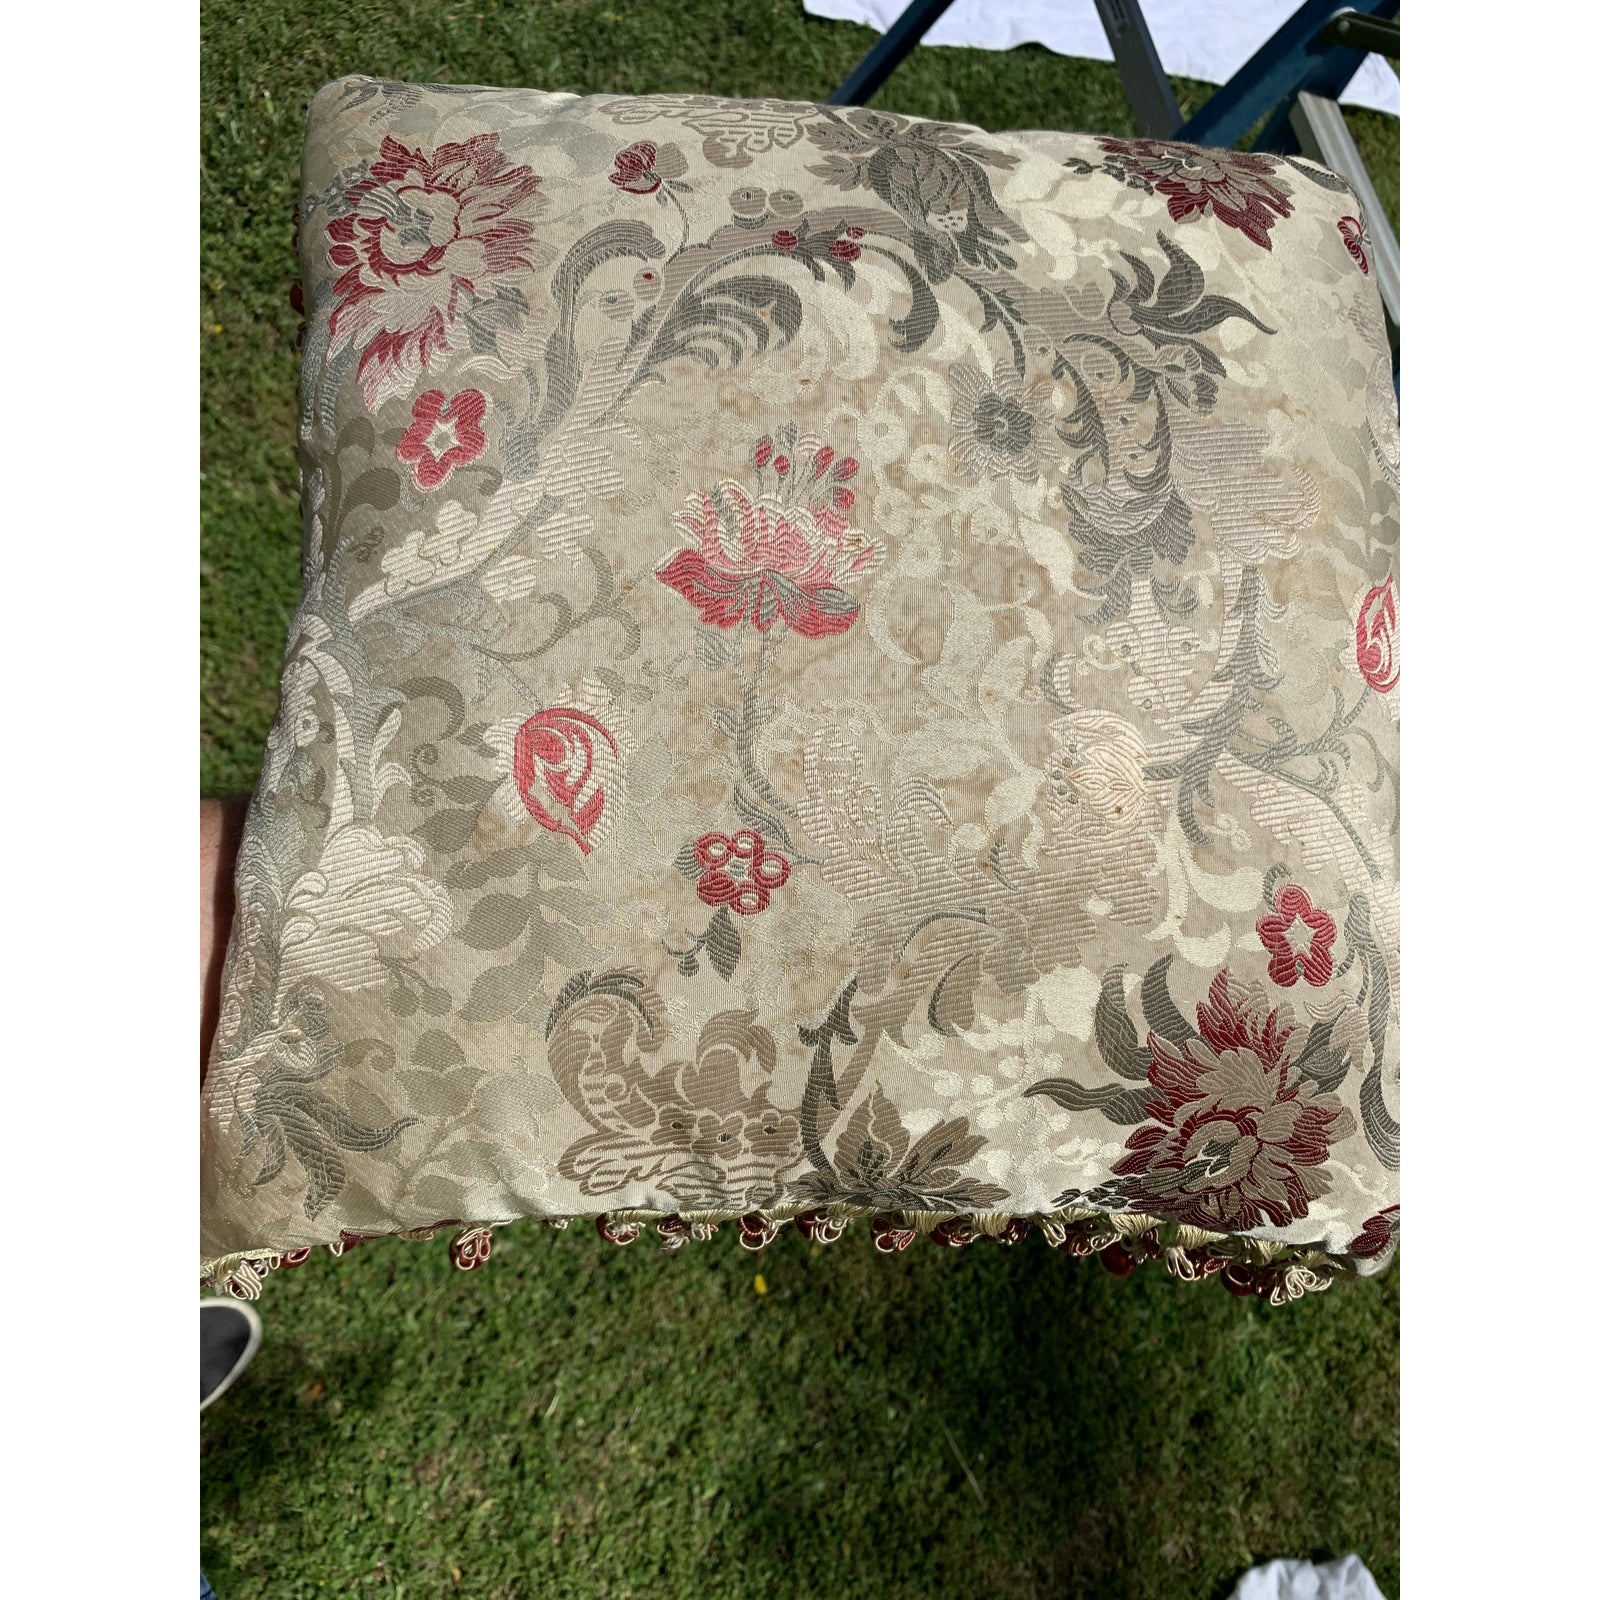 vintage-floral-classical-pillows-set-of-5-0342